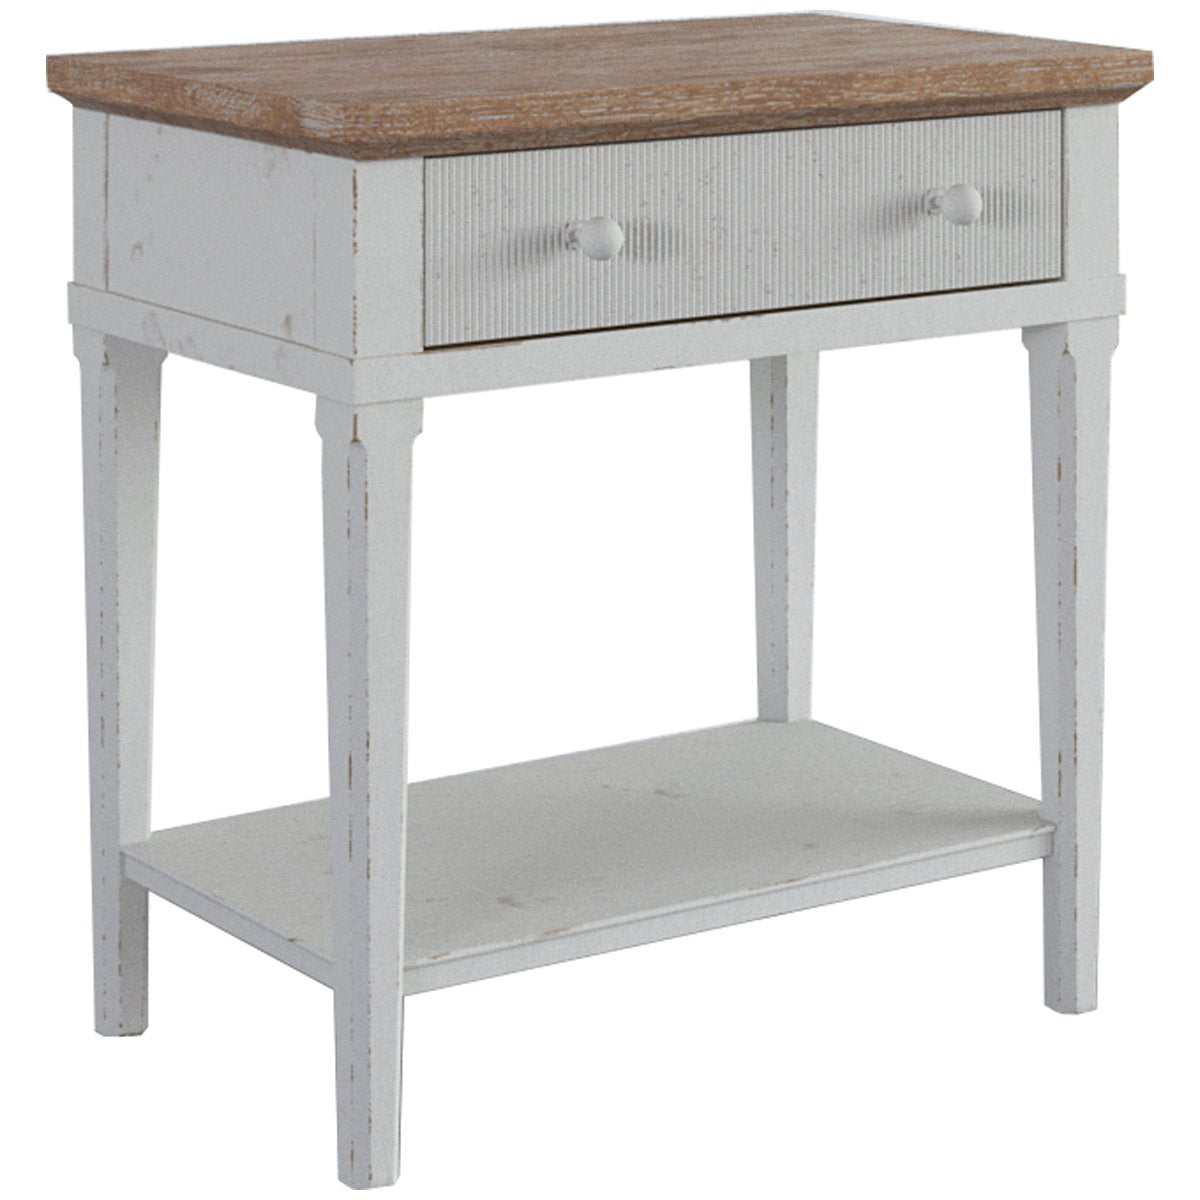 A.R.T. Furniture Palisade Nightstand in Distressed Off-White